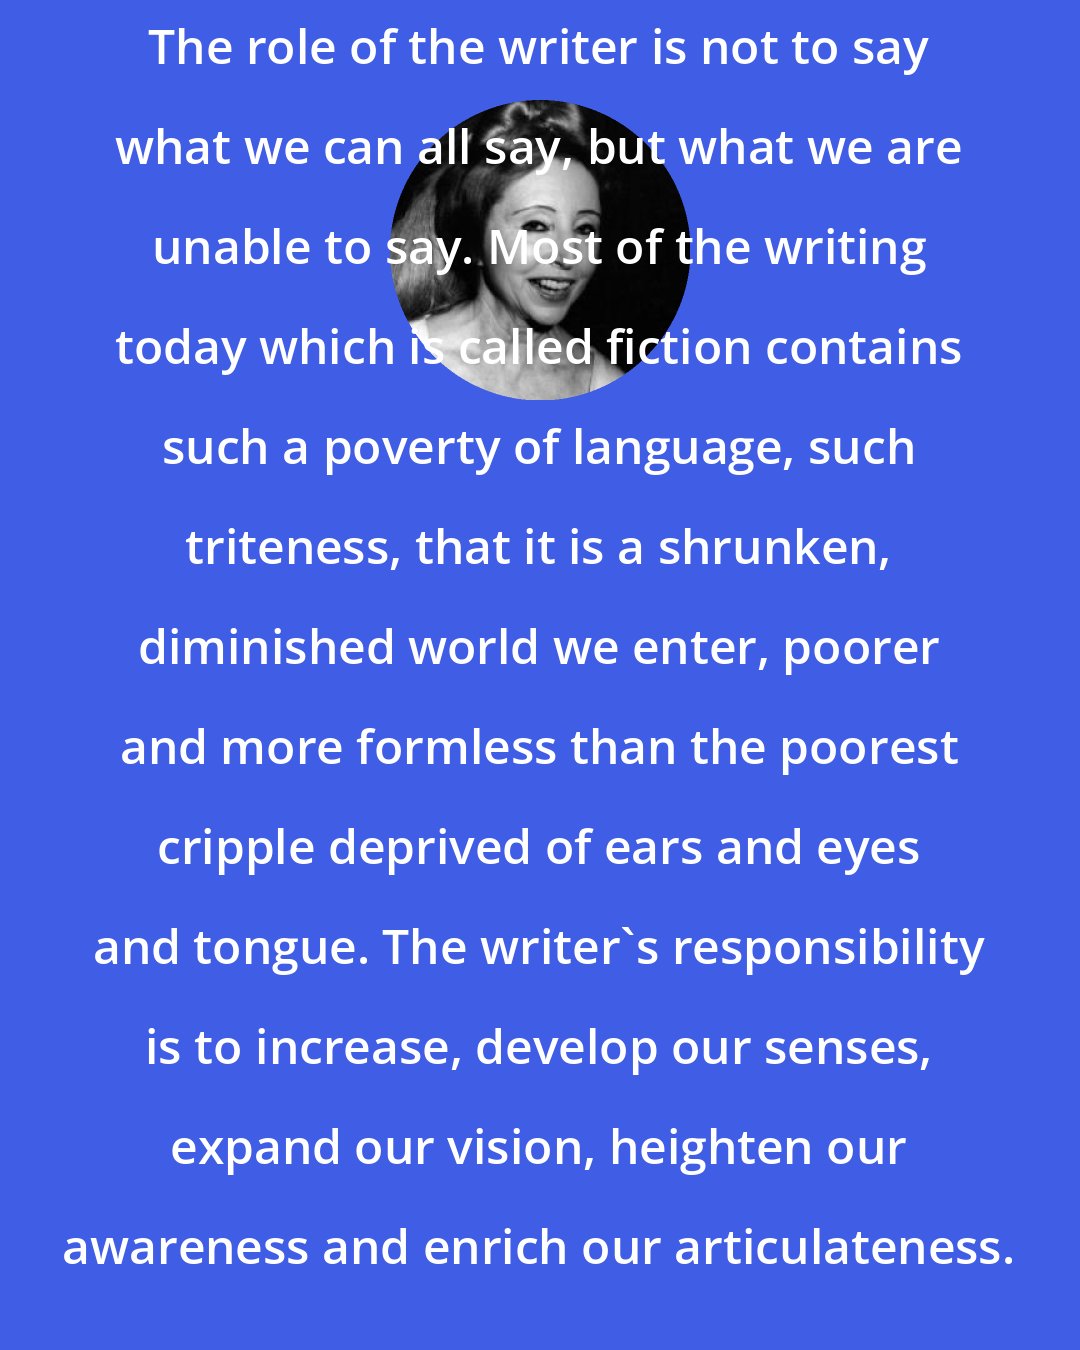 Anais Nin: The role of the writer is not to say what we can all say, but what we are unable to say. Most of the writing today which is called fiction contains such a poverty of language, such triteness, that it is a shrunken, diminished world we enter, poorer and more formless than the poorest cripple deprived of ears and eyes and tongue. The writer's responsibility is to increase, develop our senses, expand our vision, heighten our awareness and enrich our articulateness.